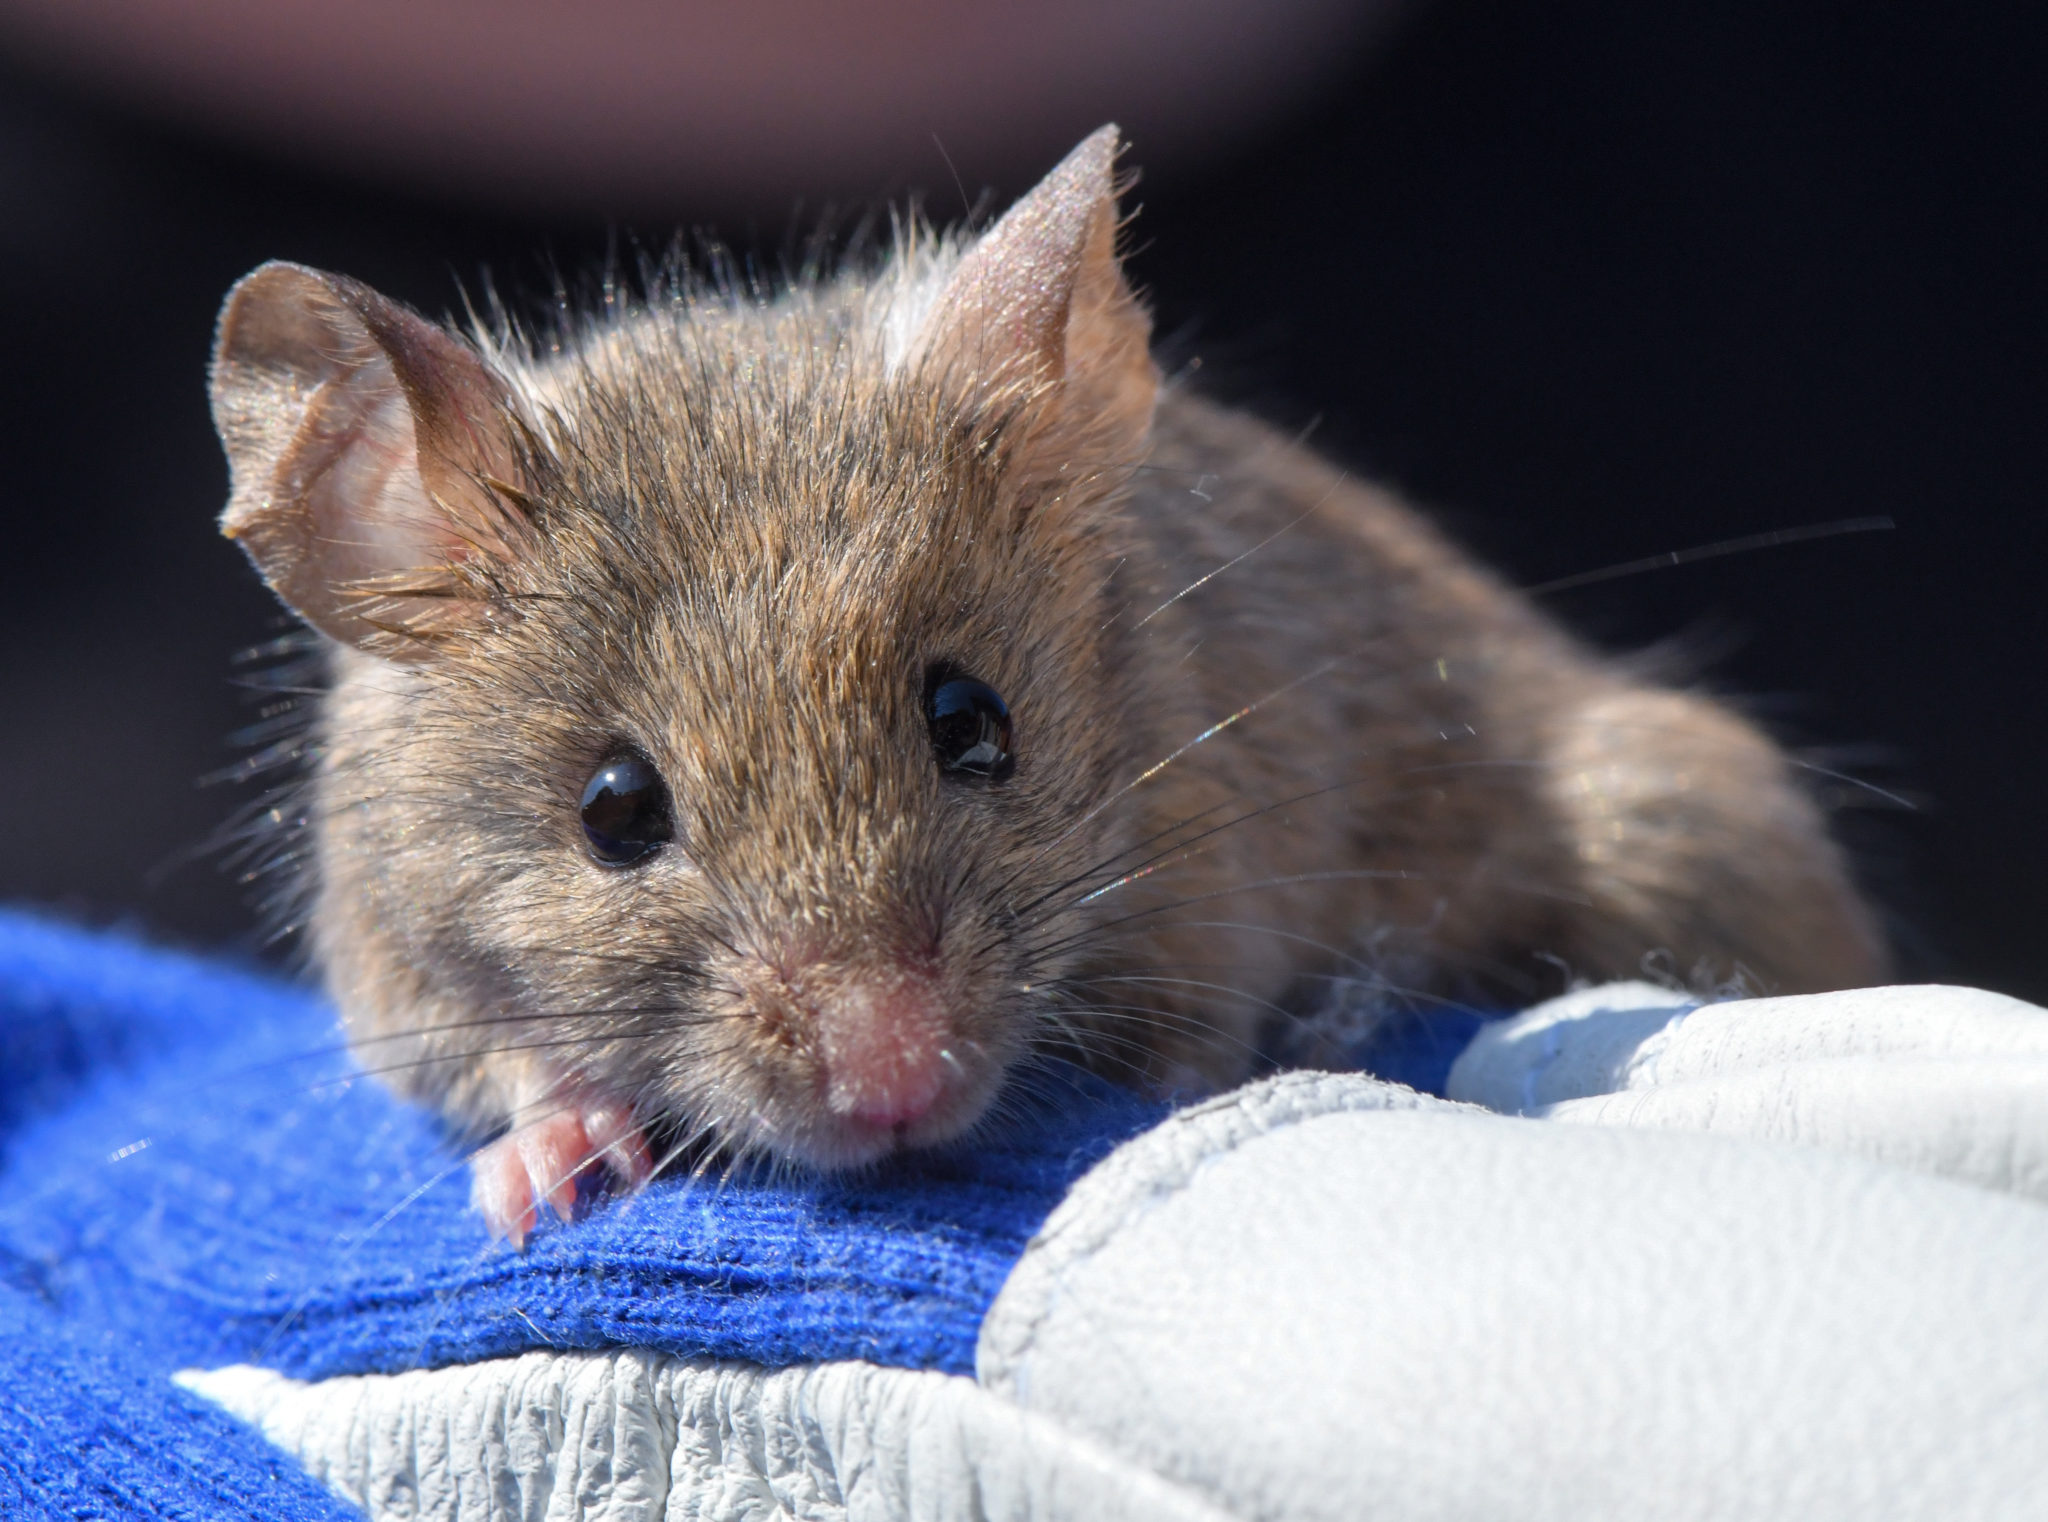 A house mouse sitting on a glove